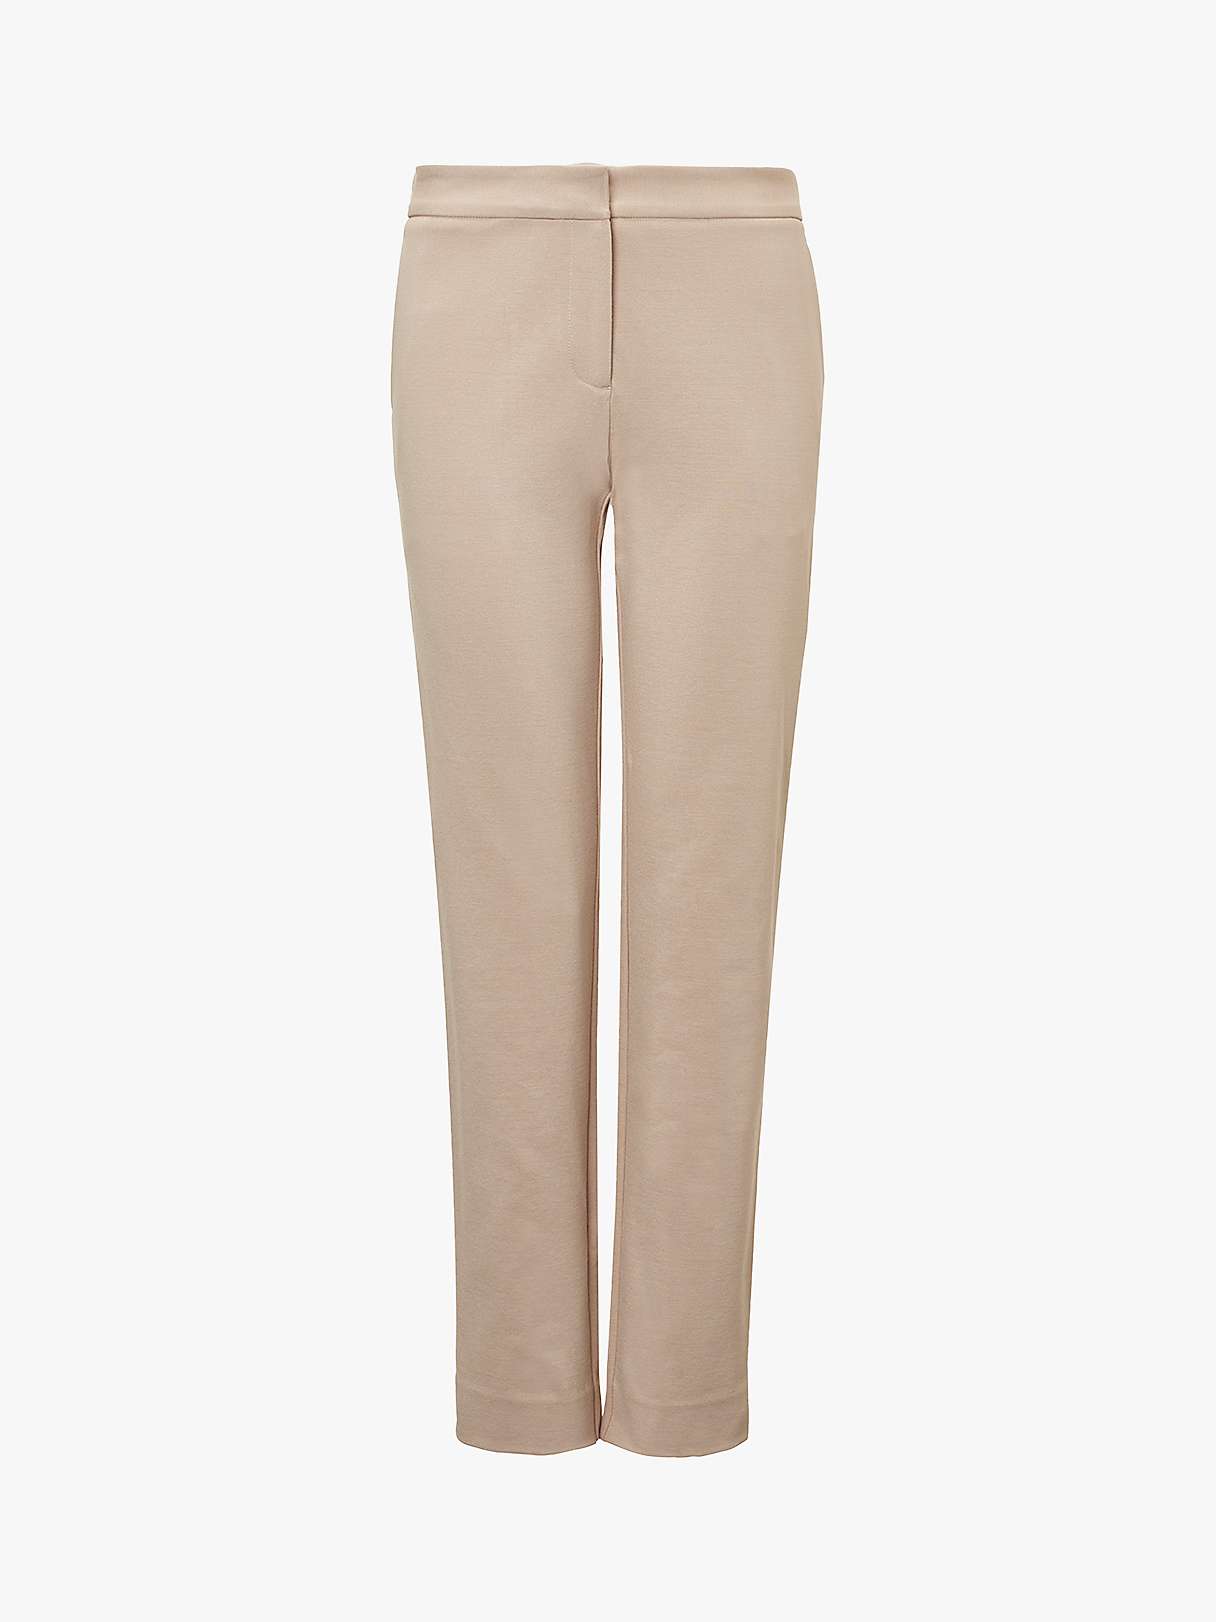 Buy Winser London Miracle Classic Trousers Online at johnlewis.com